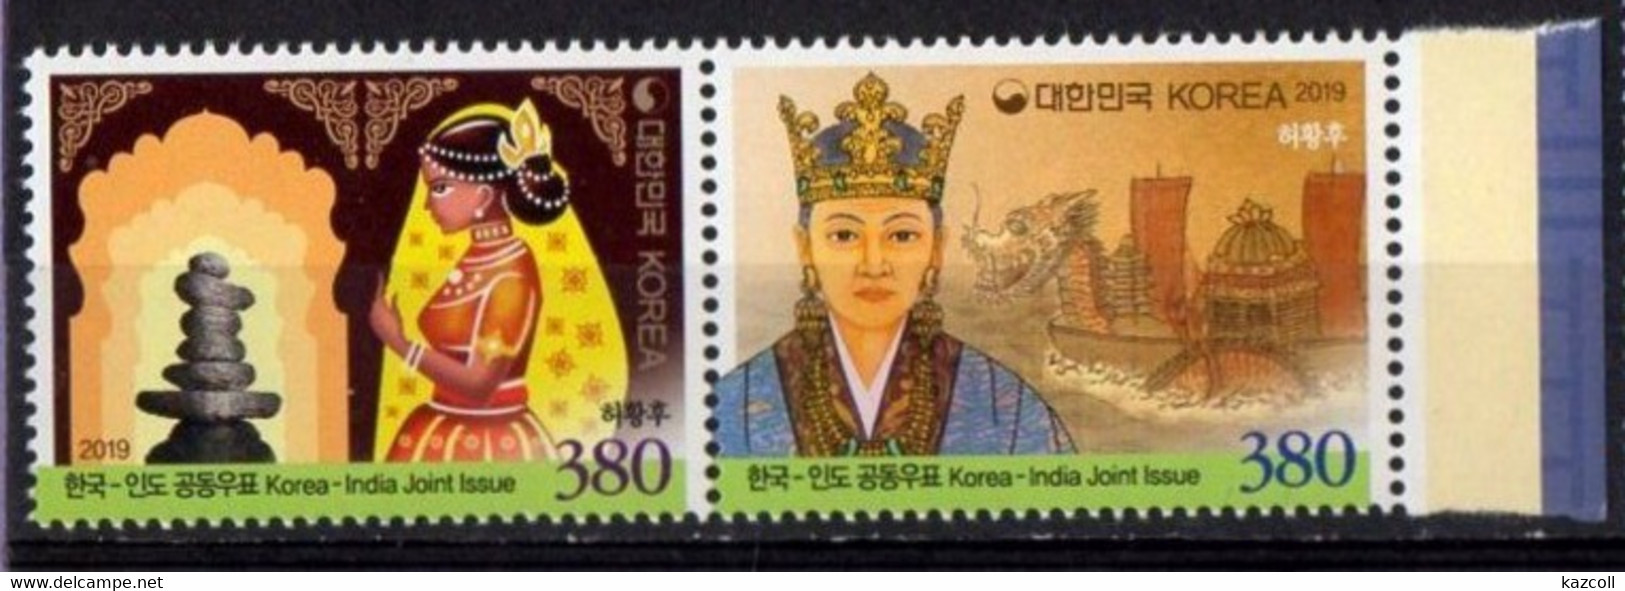 Korea, South 2019.  Queen Heo, Indian-born Korean Queen - Joint Issue With India. MNH - Korea, South